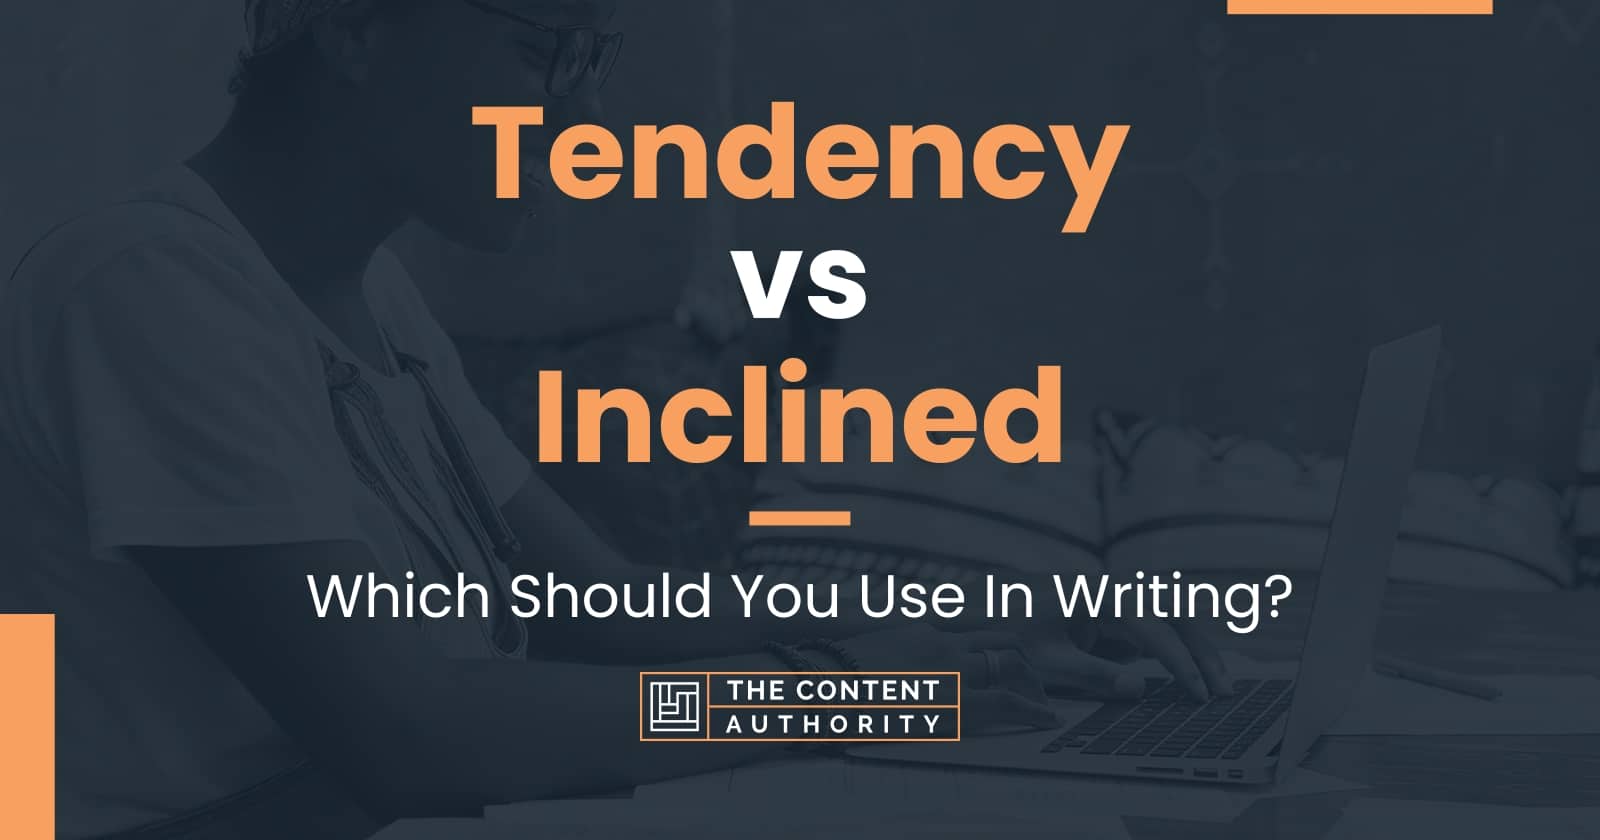 Tendency vs Inclined: Which Should You Use In Writing?